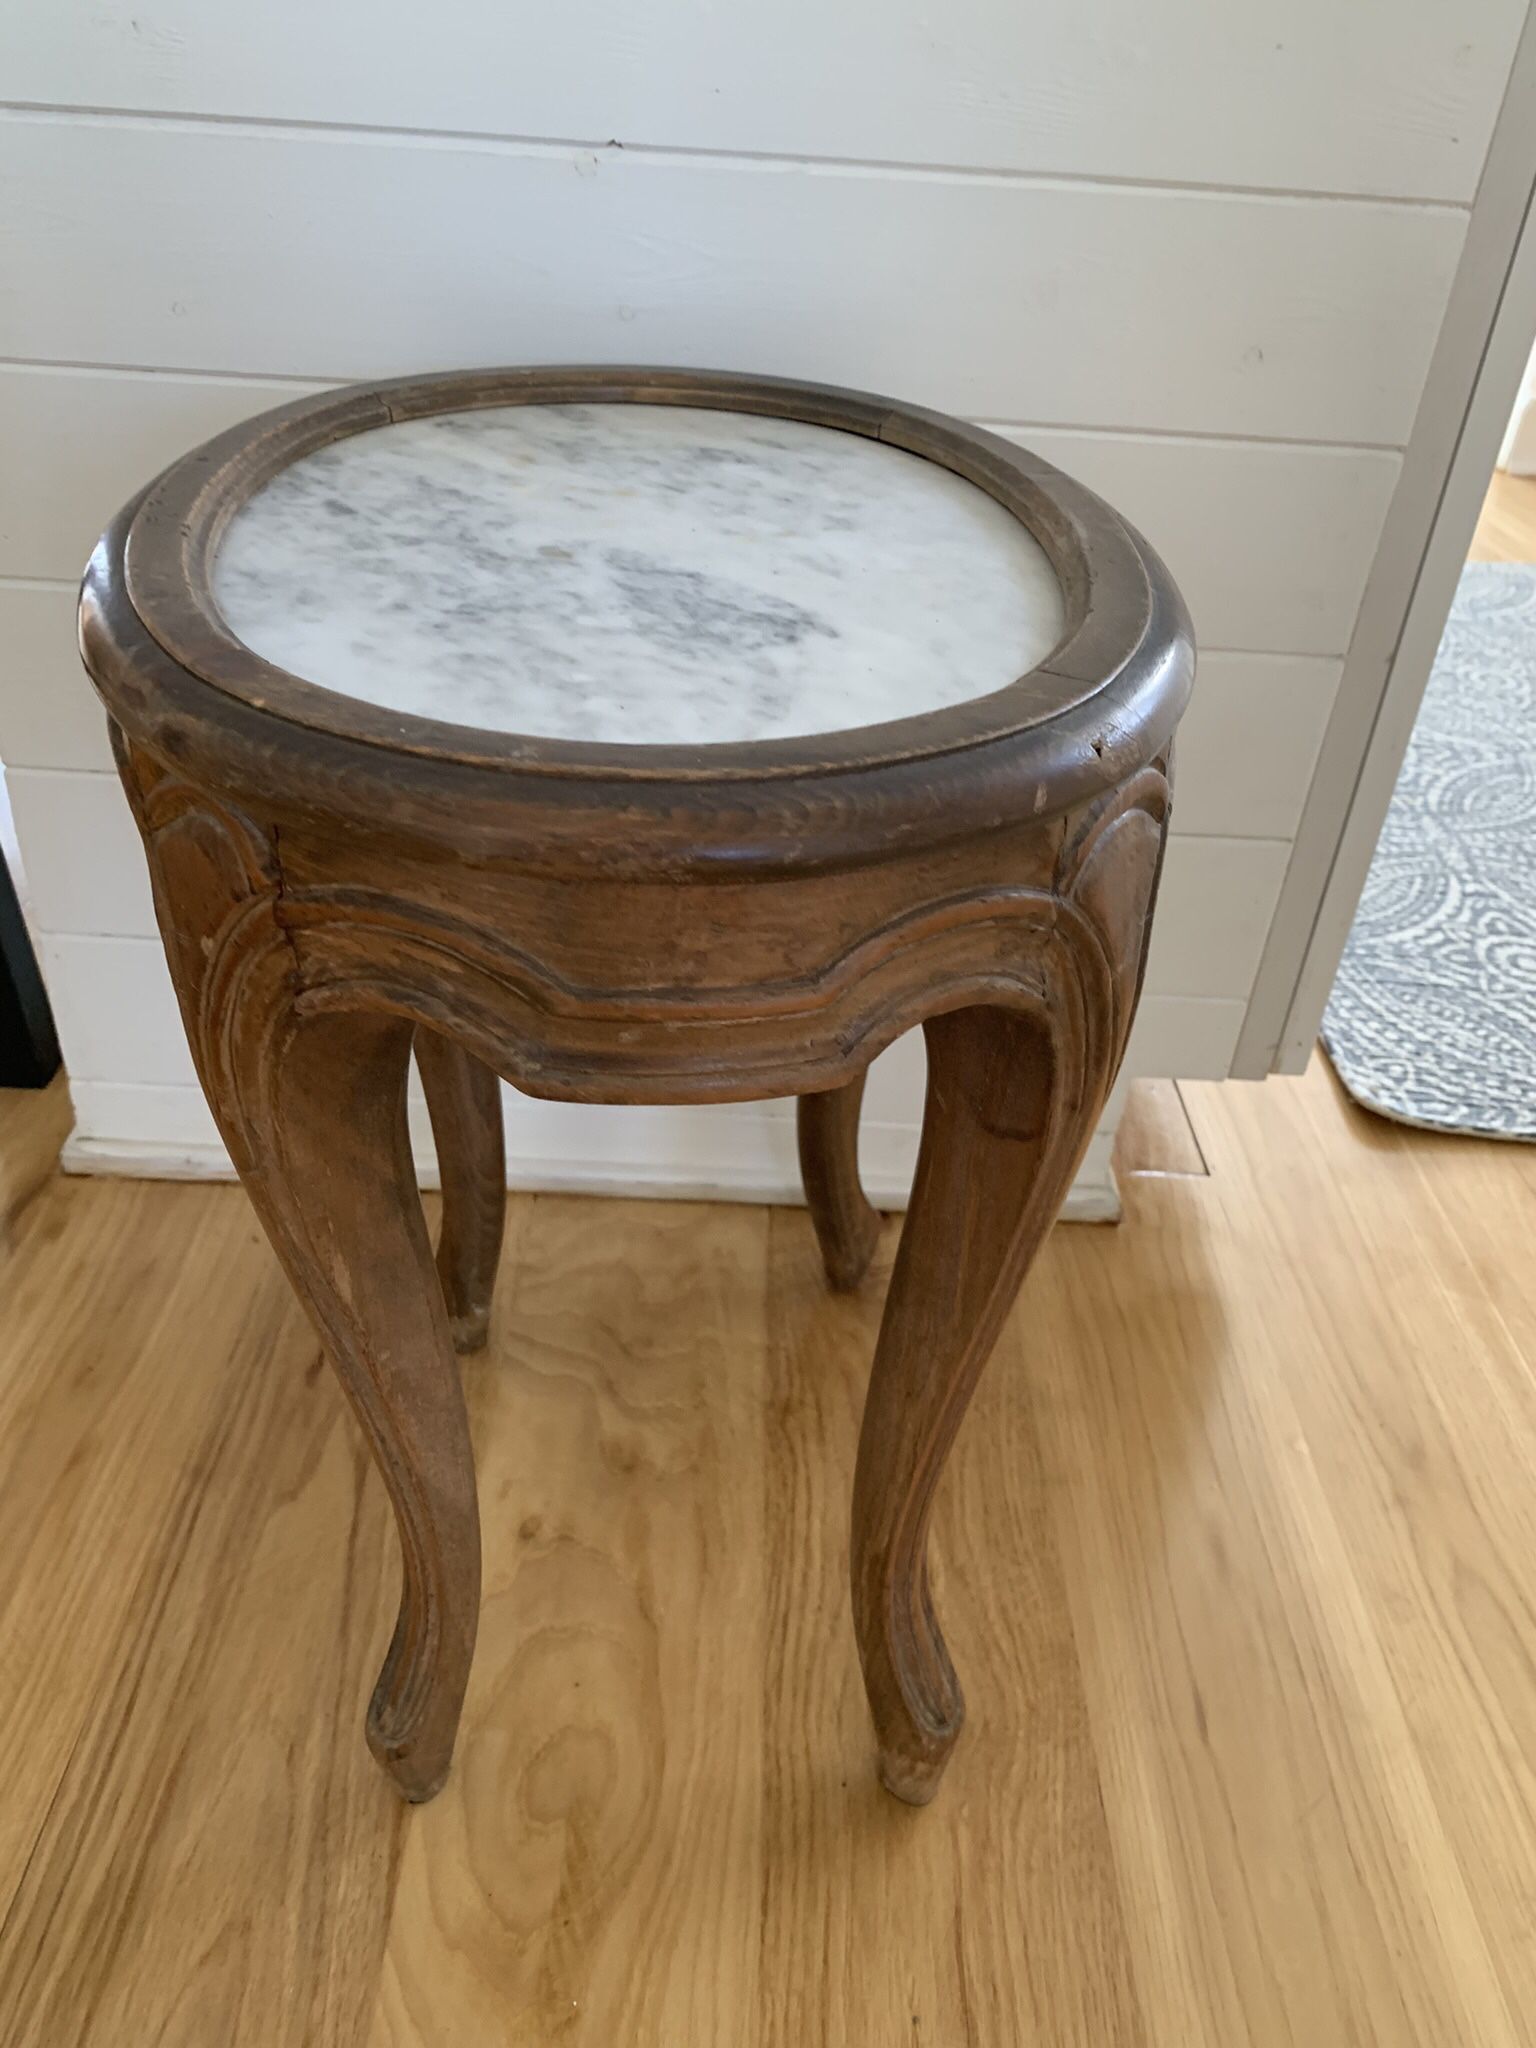 Antique Wood Table With Marble Inset Top